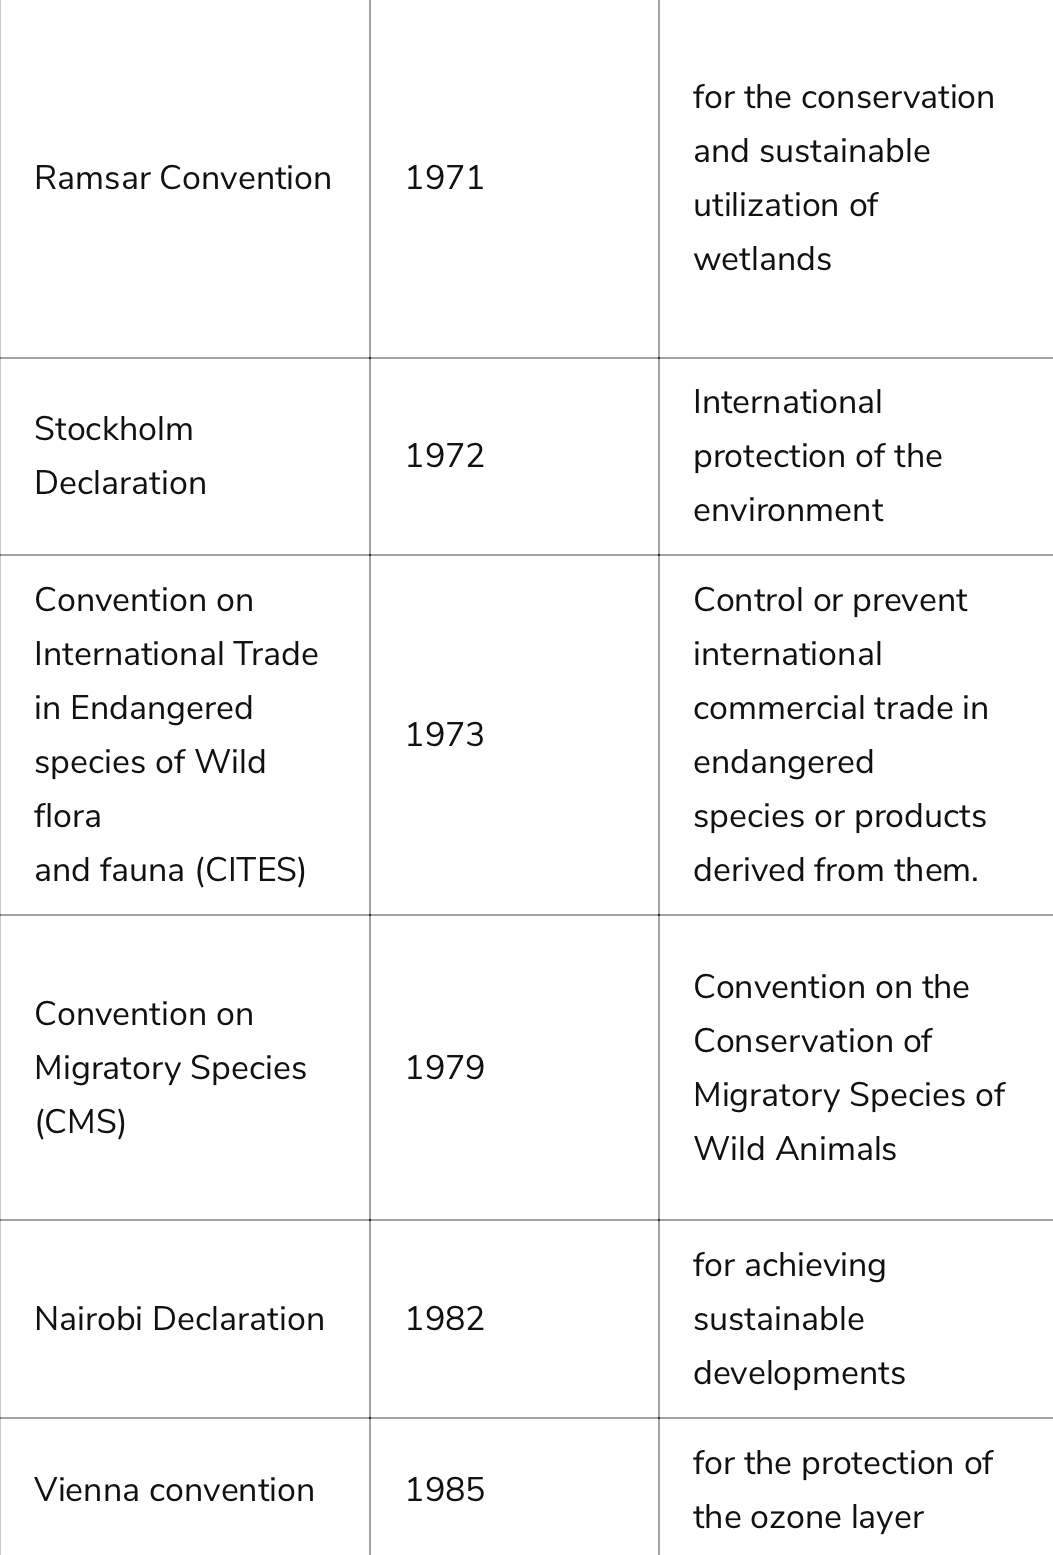 What is ramsar Convention, STOCKHOLM, CITES, 